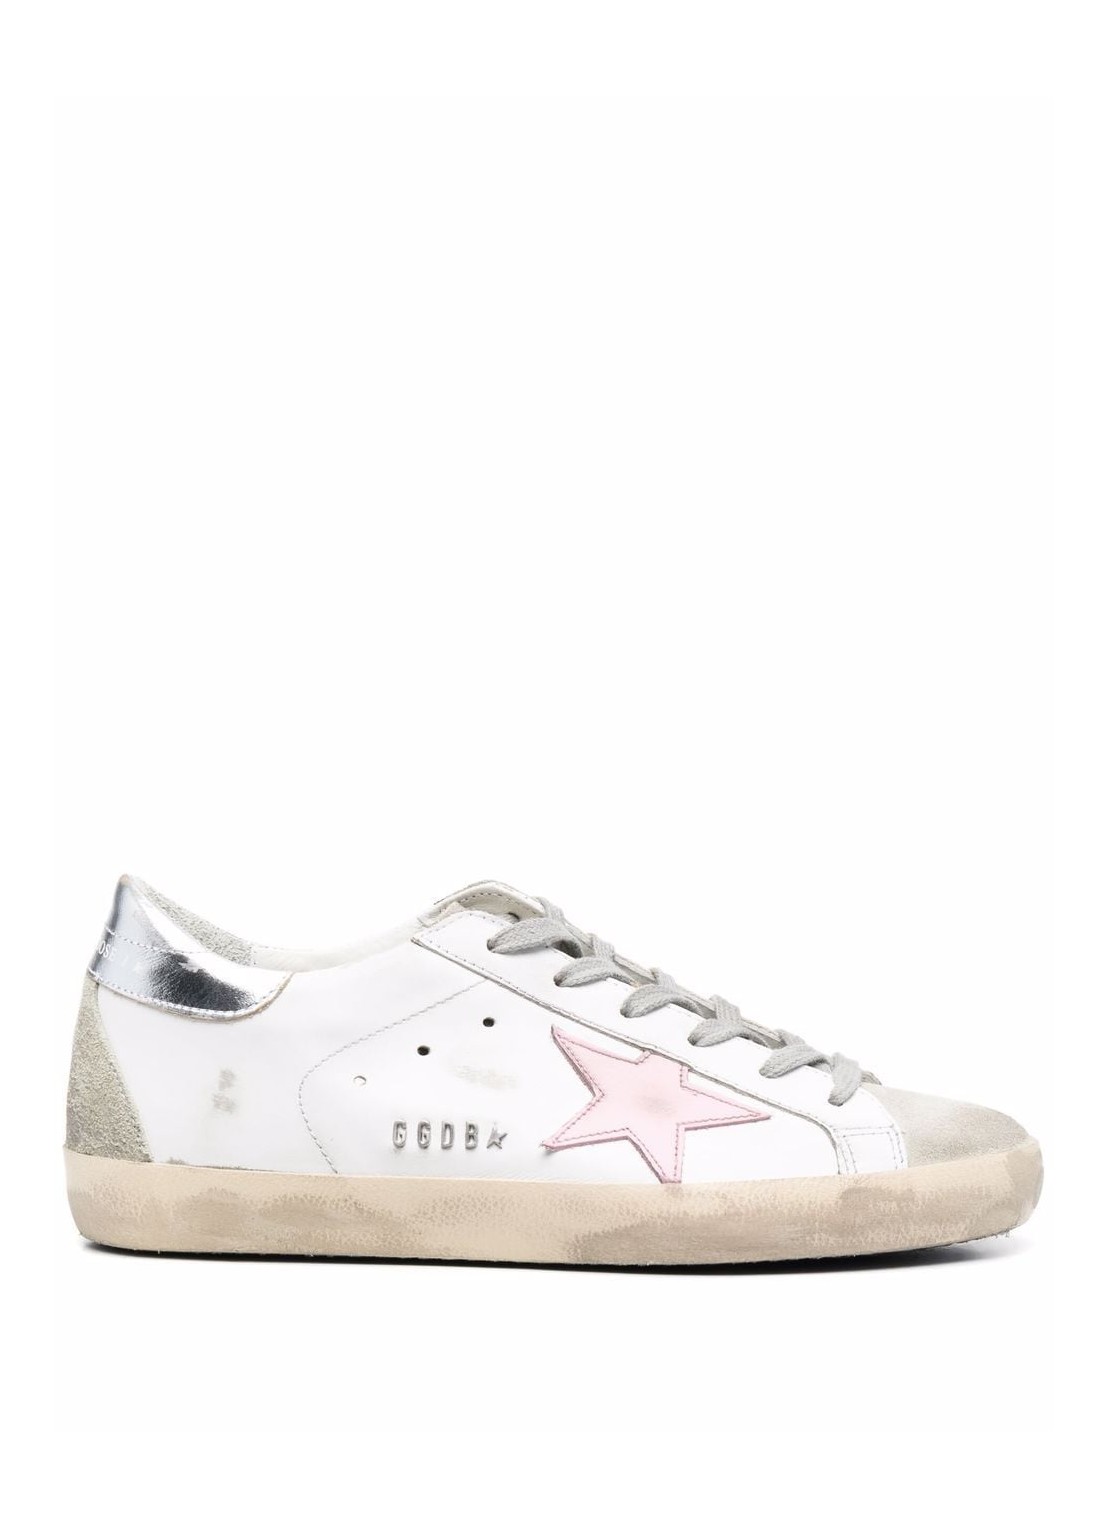 Sneaker golden goose sneaker woman super-star leather upper and star gwf00102f002435 81482 talla bla